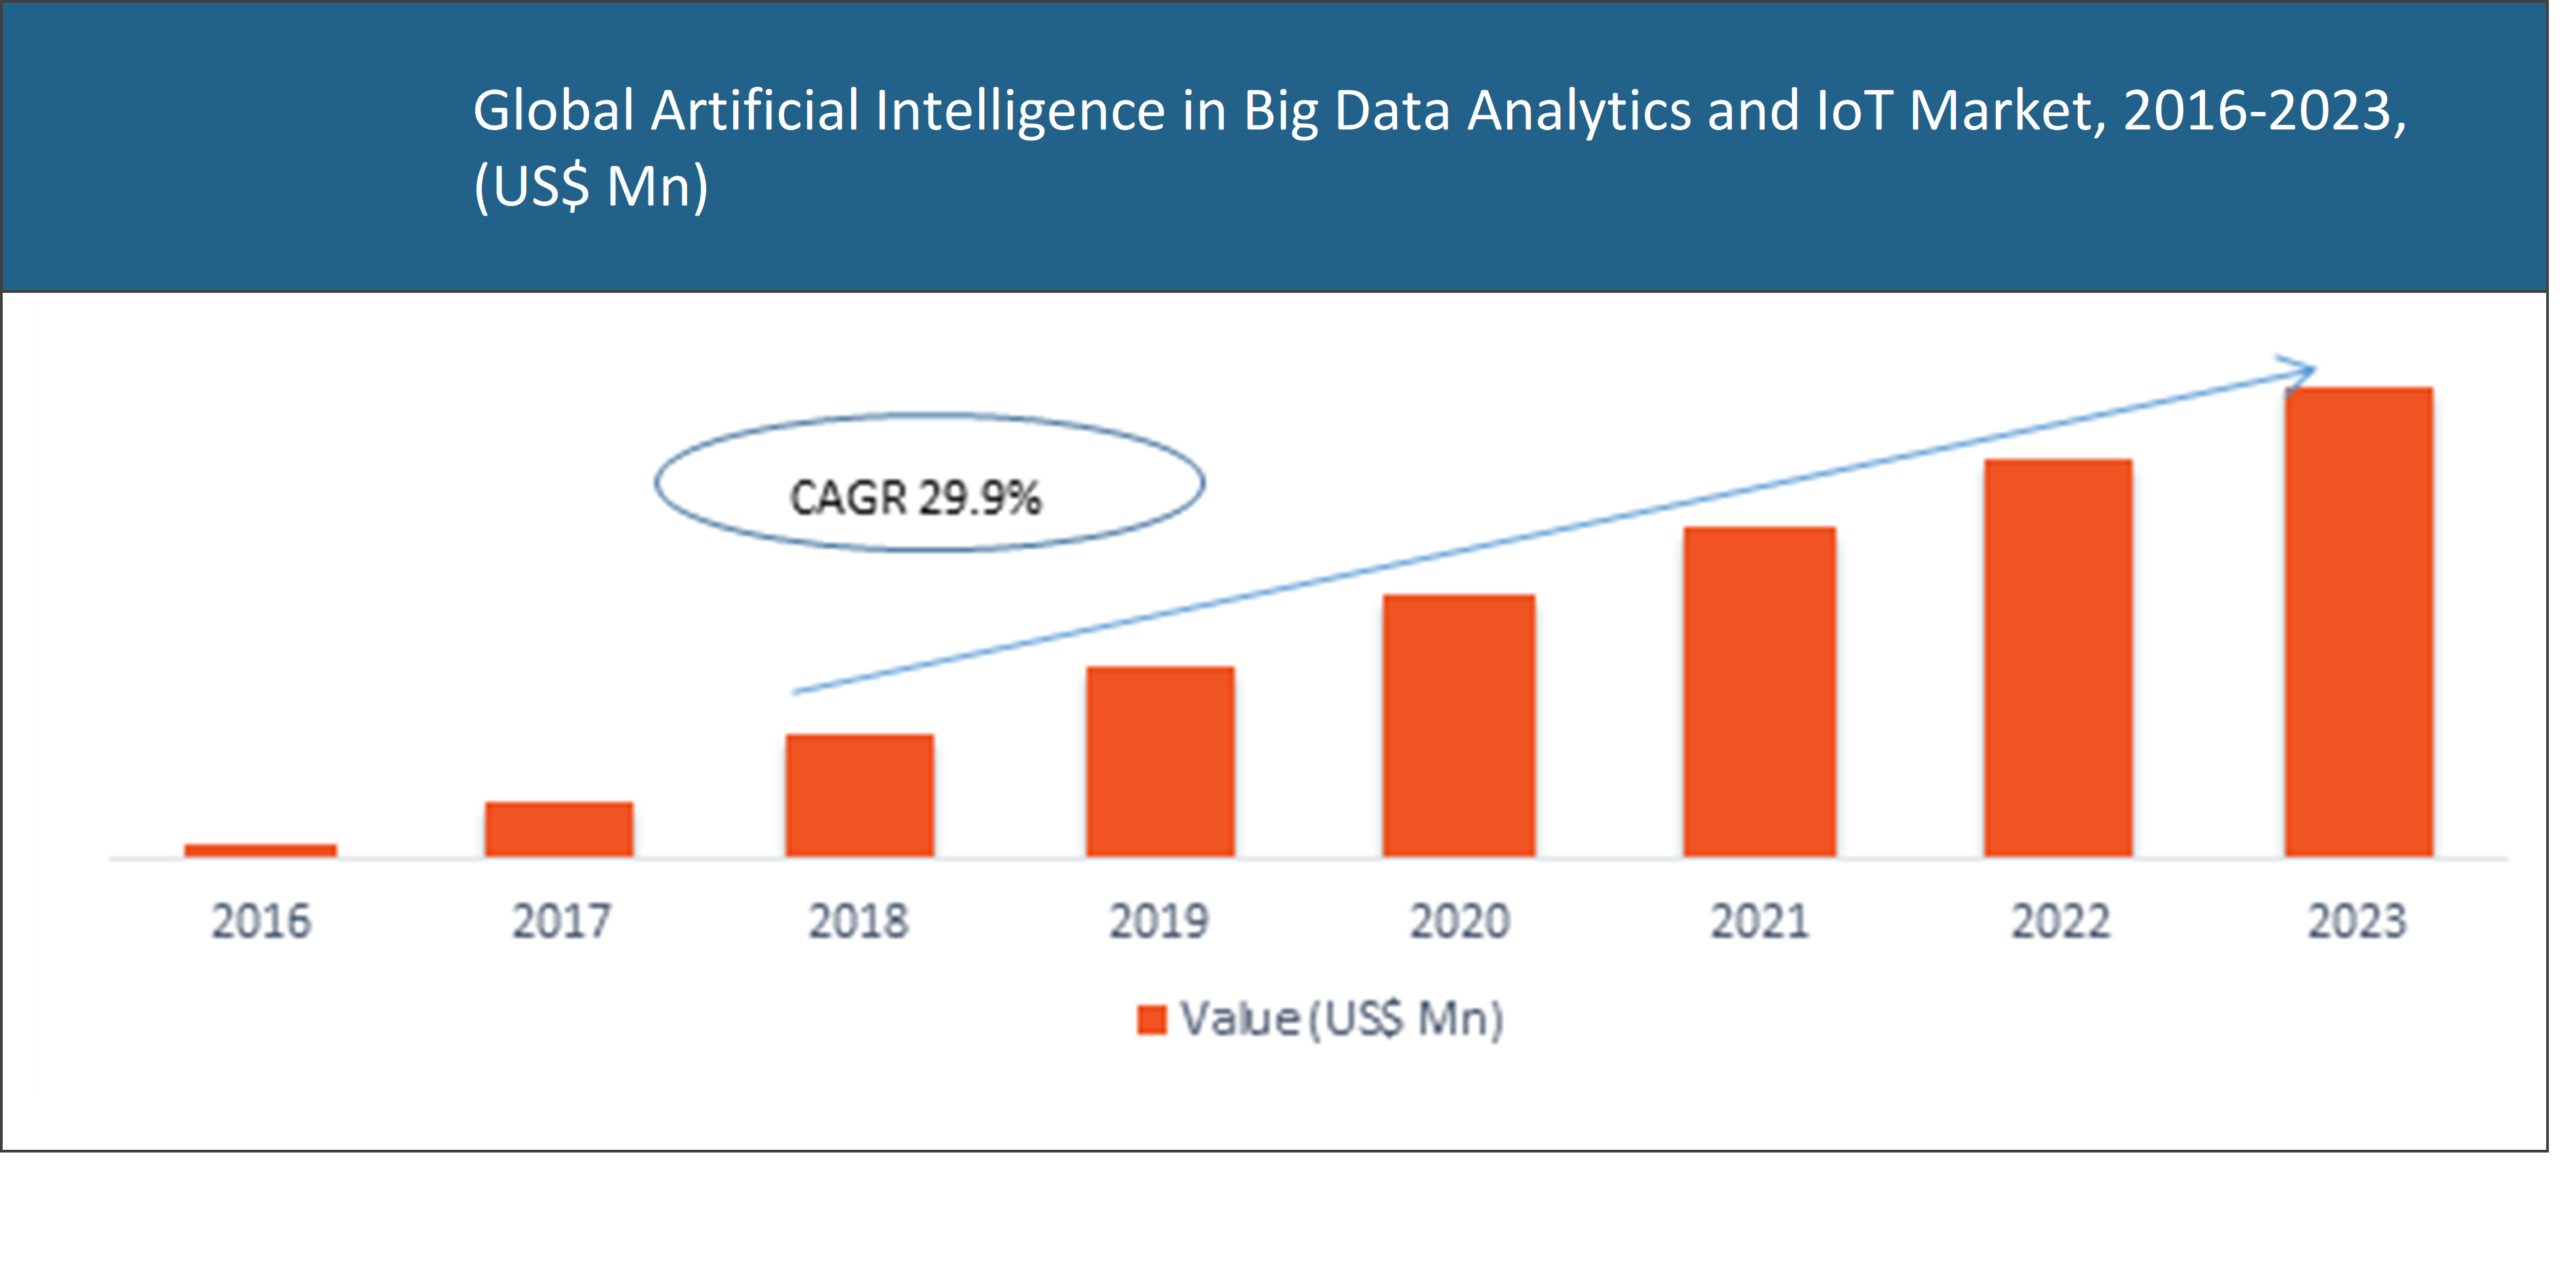 Global Artificial Intelligence in Big Data Analytics and IoT Market